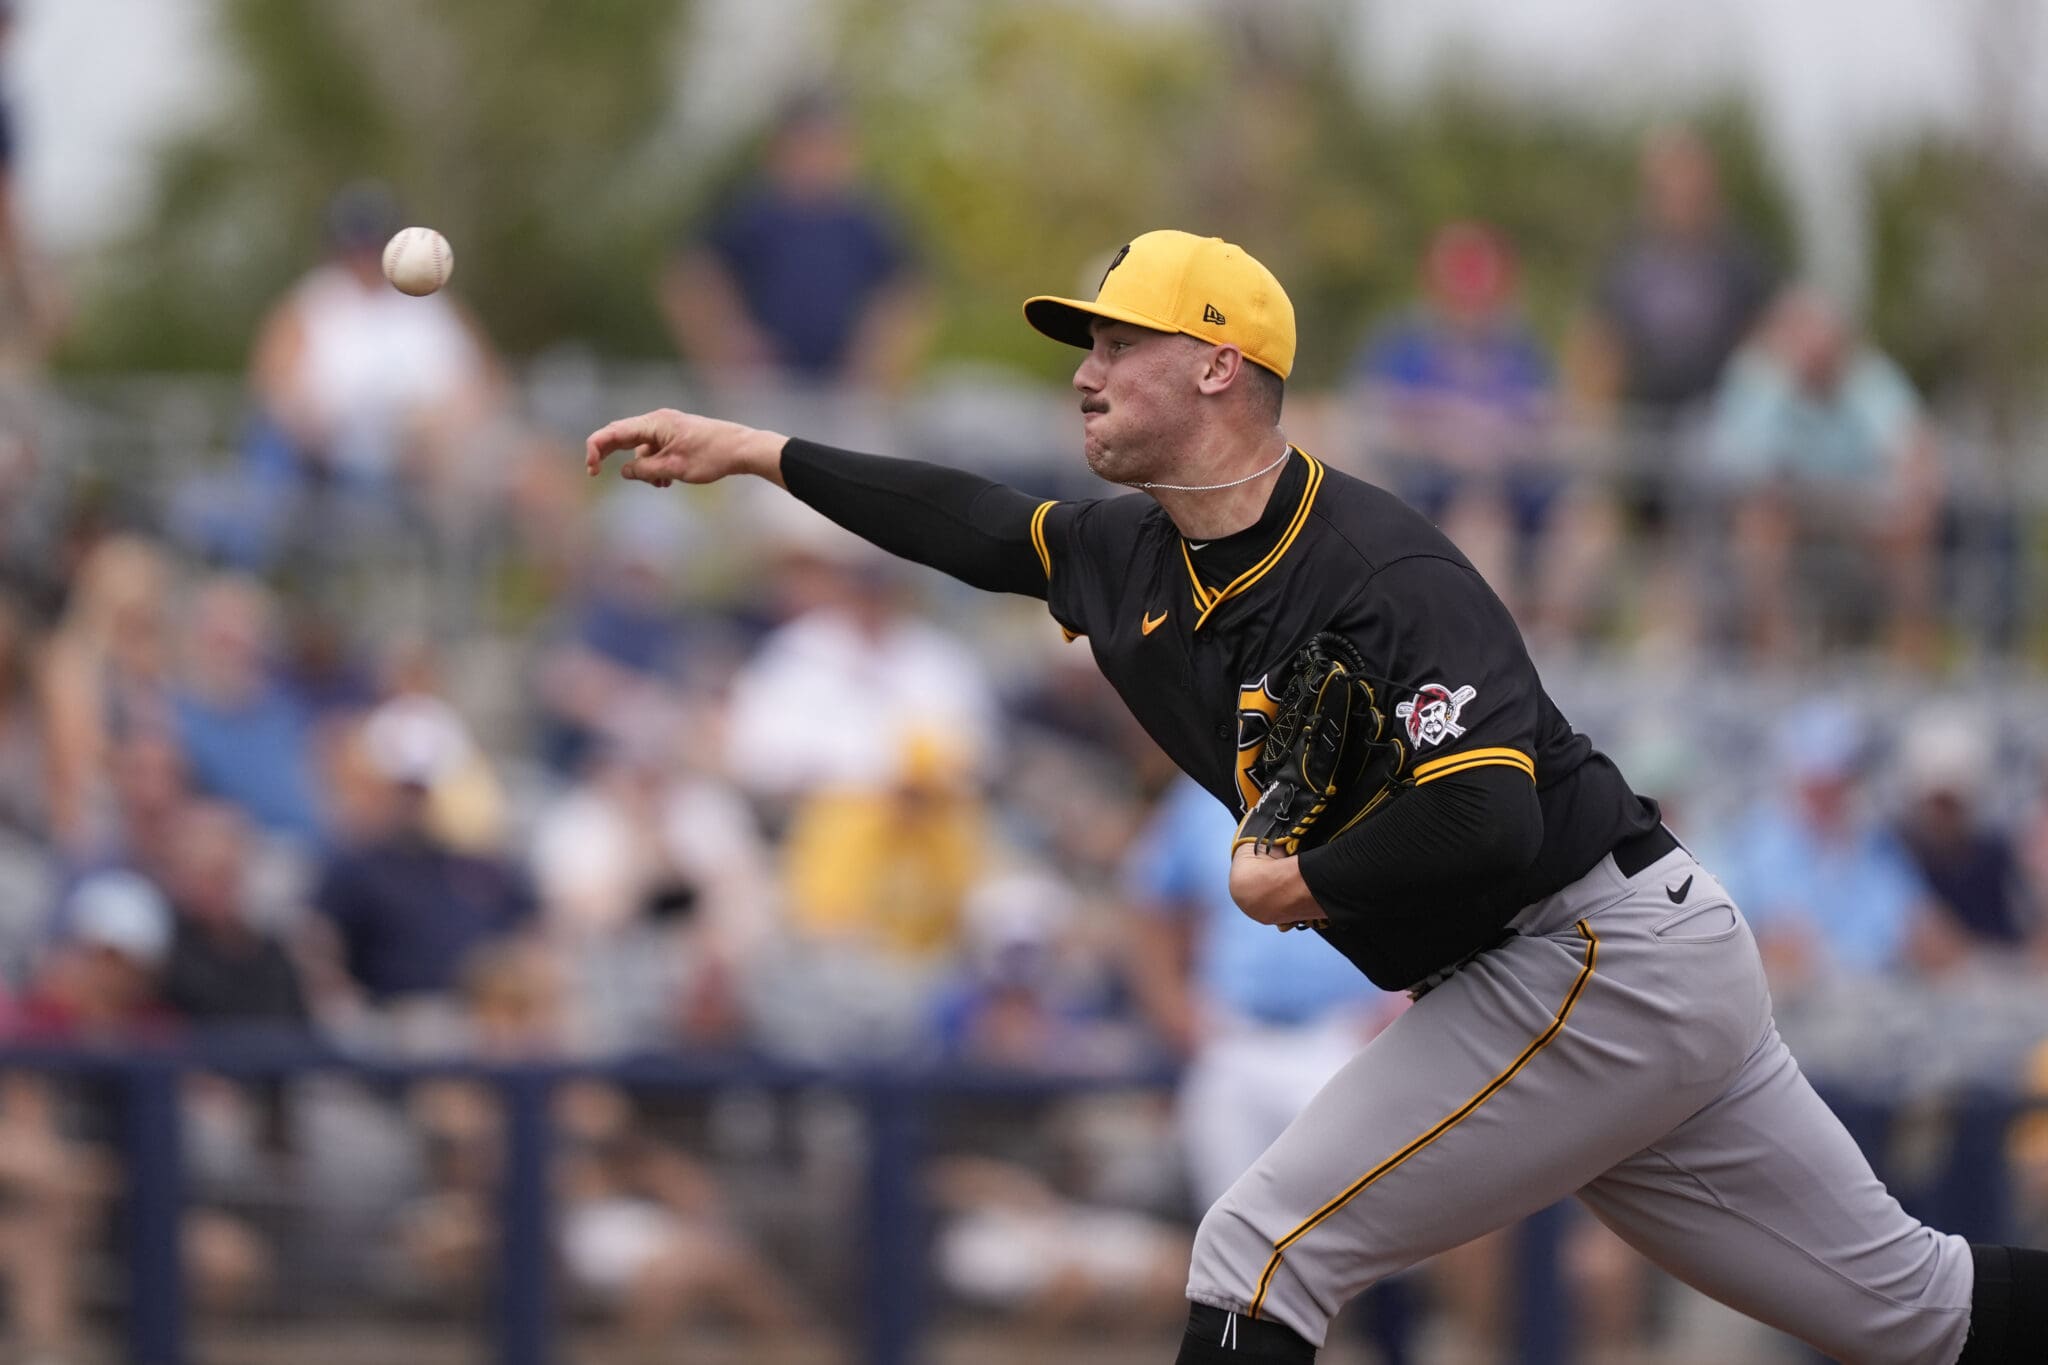 Pittsburgh Pirates pitcher Paul Skenes throws the pitch that resulted in a solo home run by Tampa Bay Rays Amed Rosario in the fourth inning of a spring training baseball game in Port Charlotte, Fla., Monday, March 4, 2024. (AP Photo/Gerald Herbert)